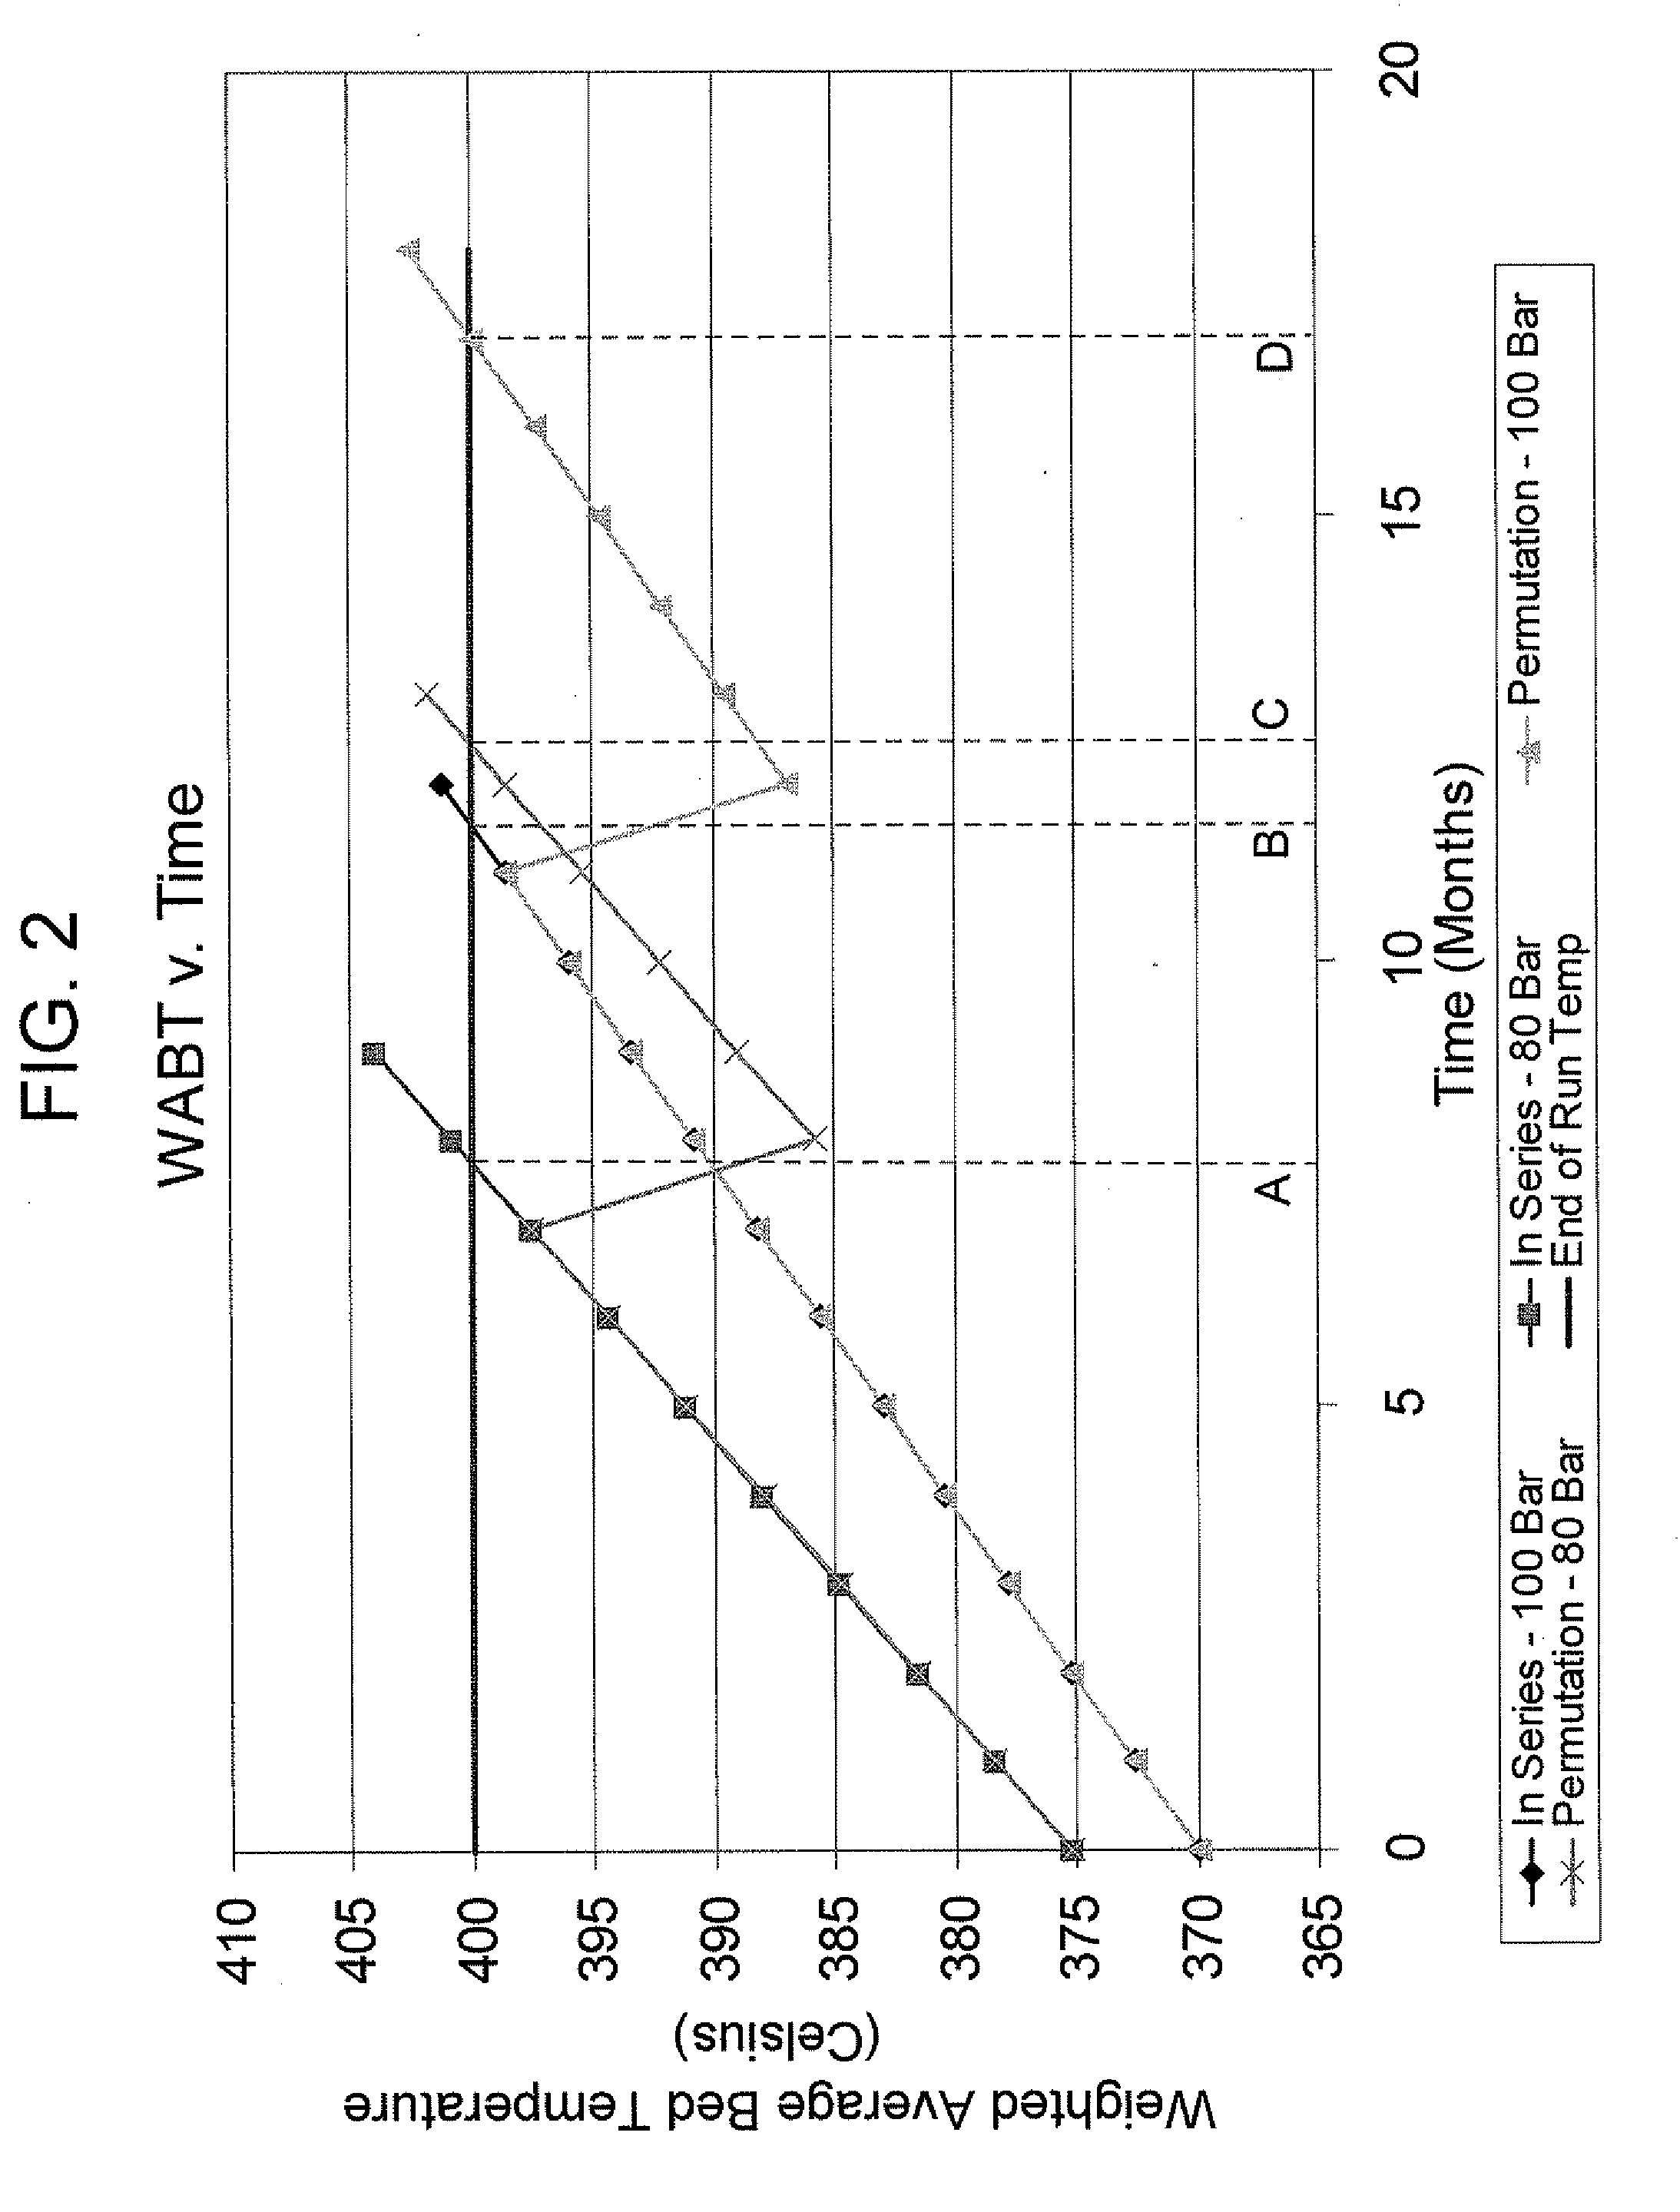 Process for catalytic hydrotreating of sour crude oils